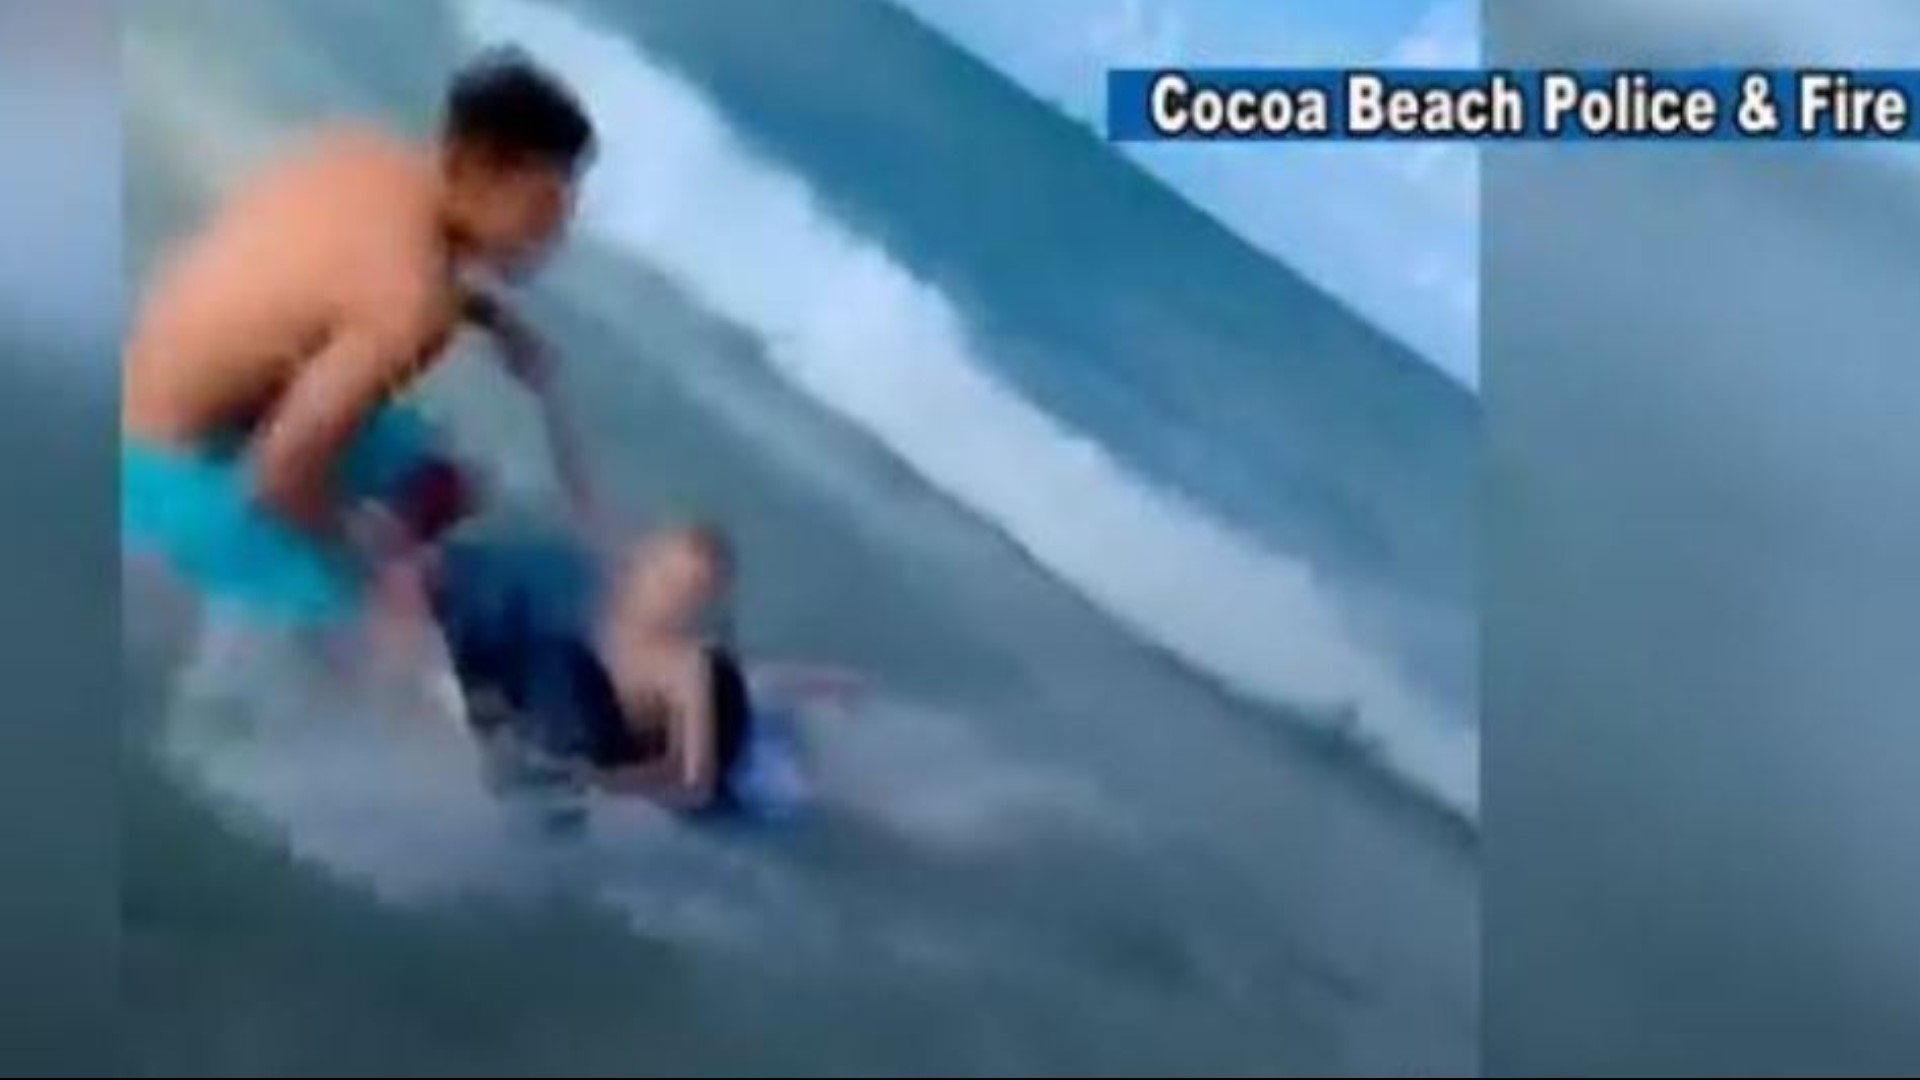 When an off-duty officer saw a shark getting dangerously close to a young boy at Cocoa Beach, he knew he had to act.